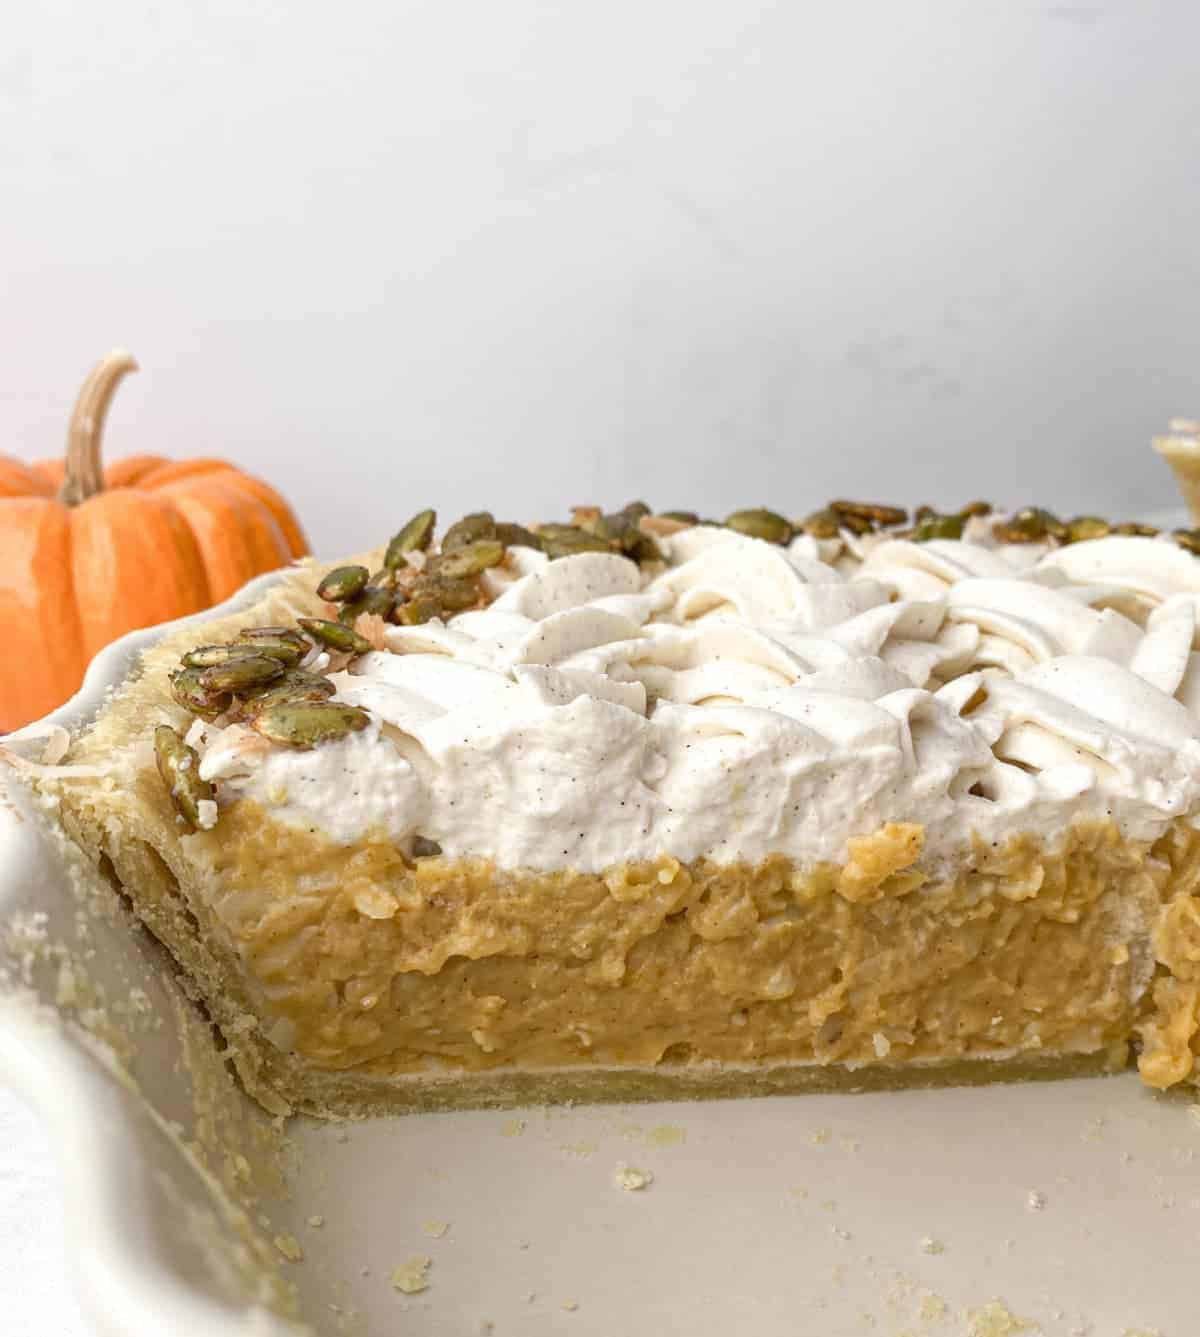 Pumpkin Coconut Cream Pie sliced in the pie plate with a small pumpkin in the background